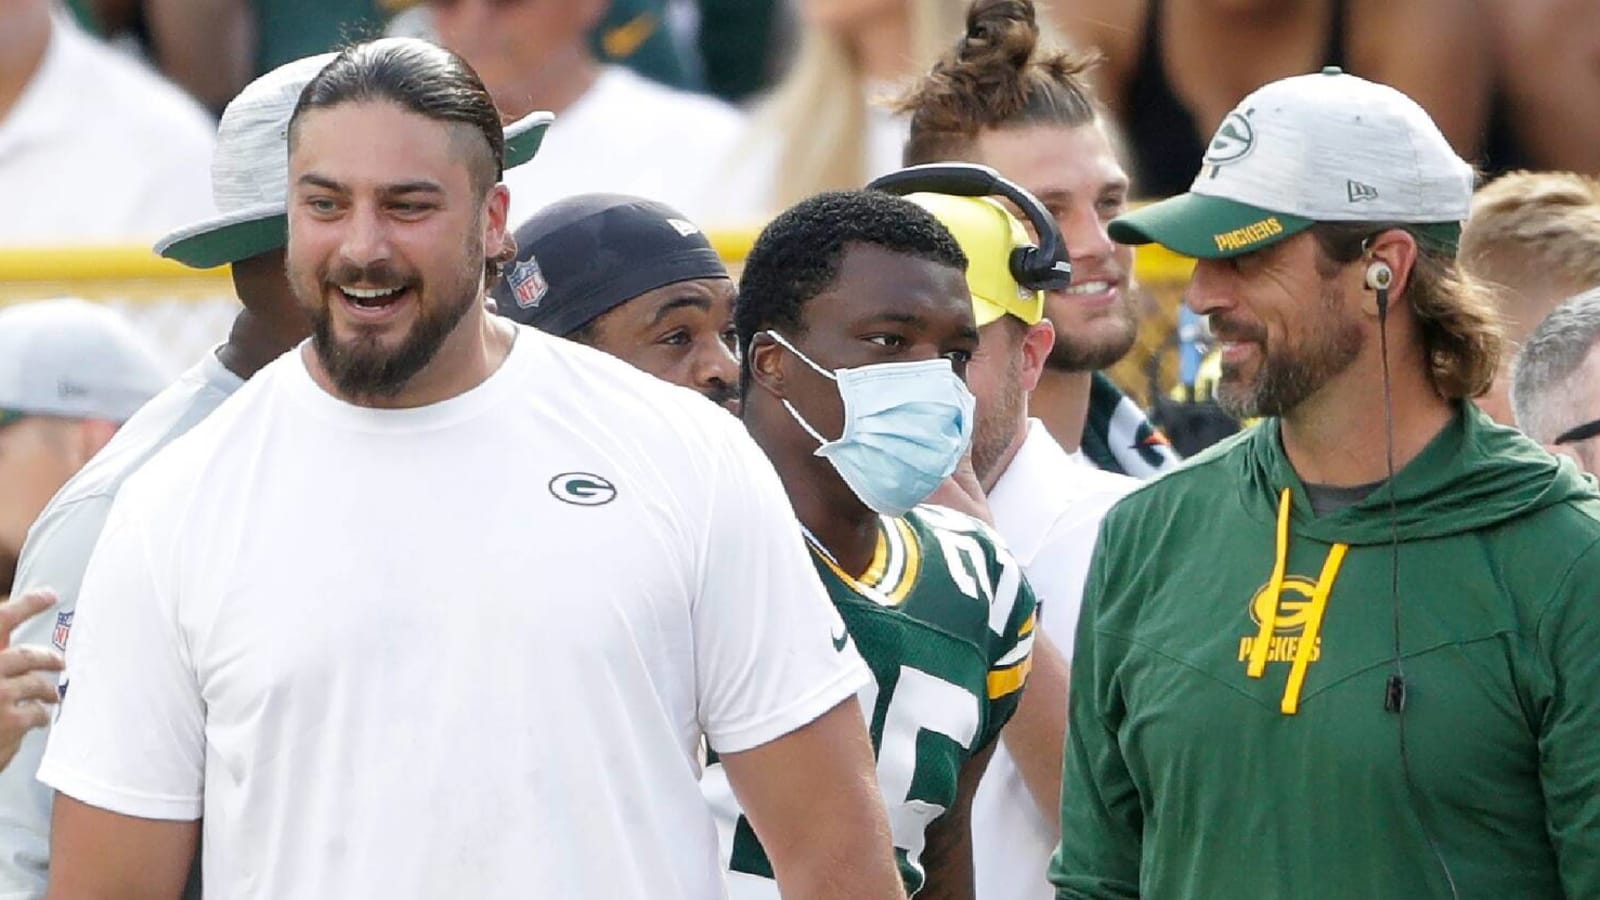 Former teammate Bakhtiari goes off on NFL after Rodgers injury